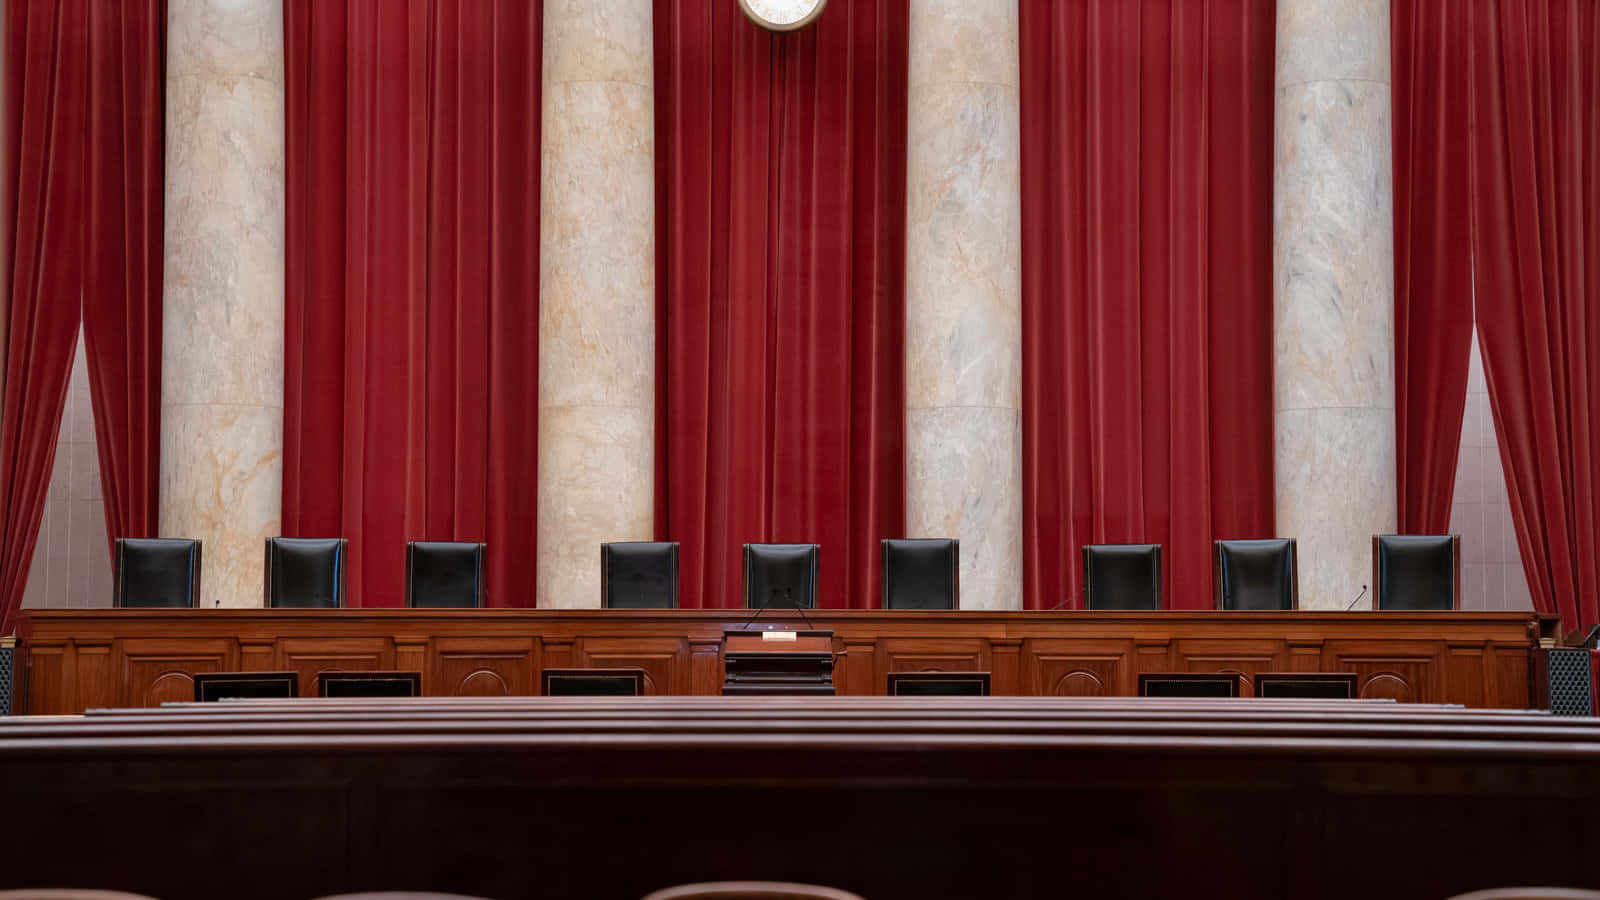 Long Red Curtains Courtroom Background